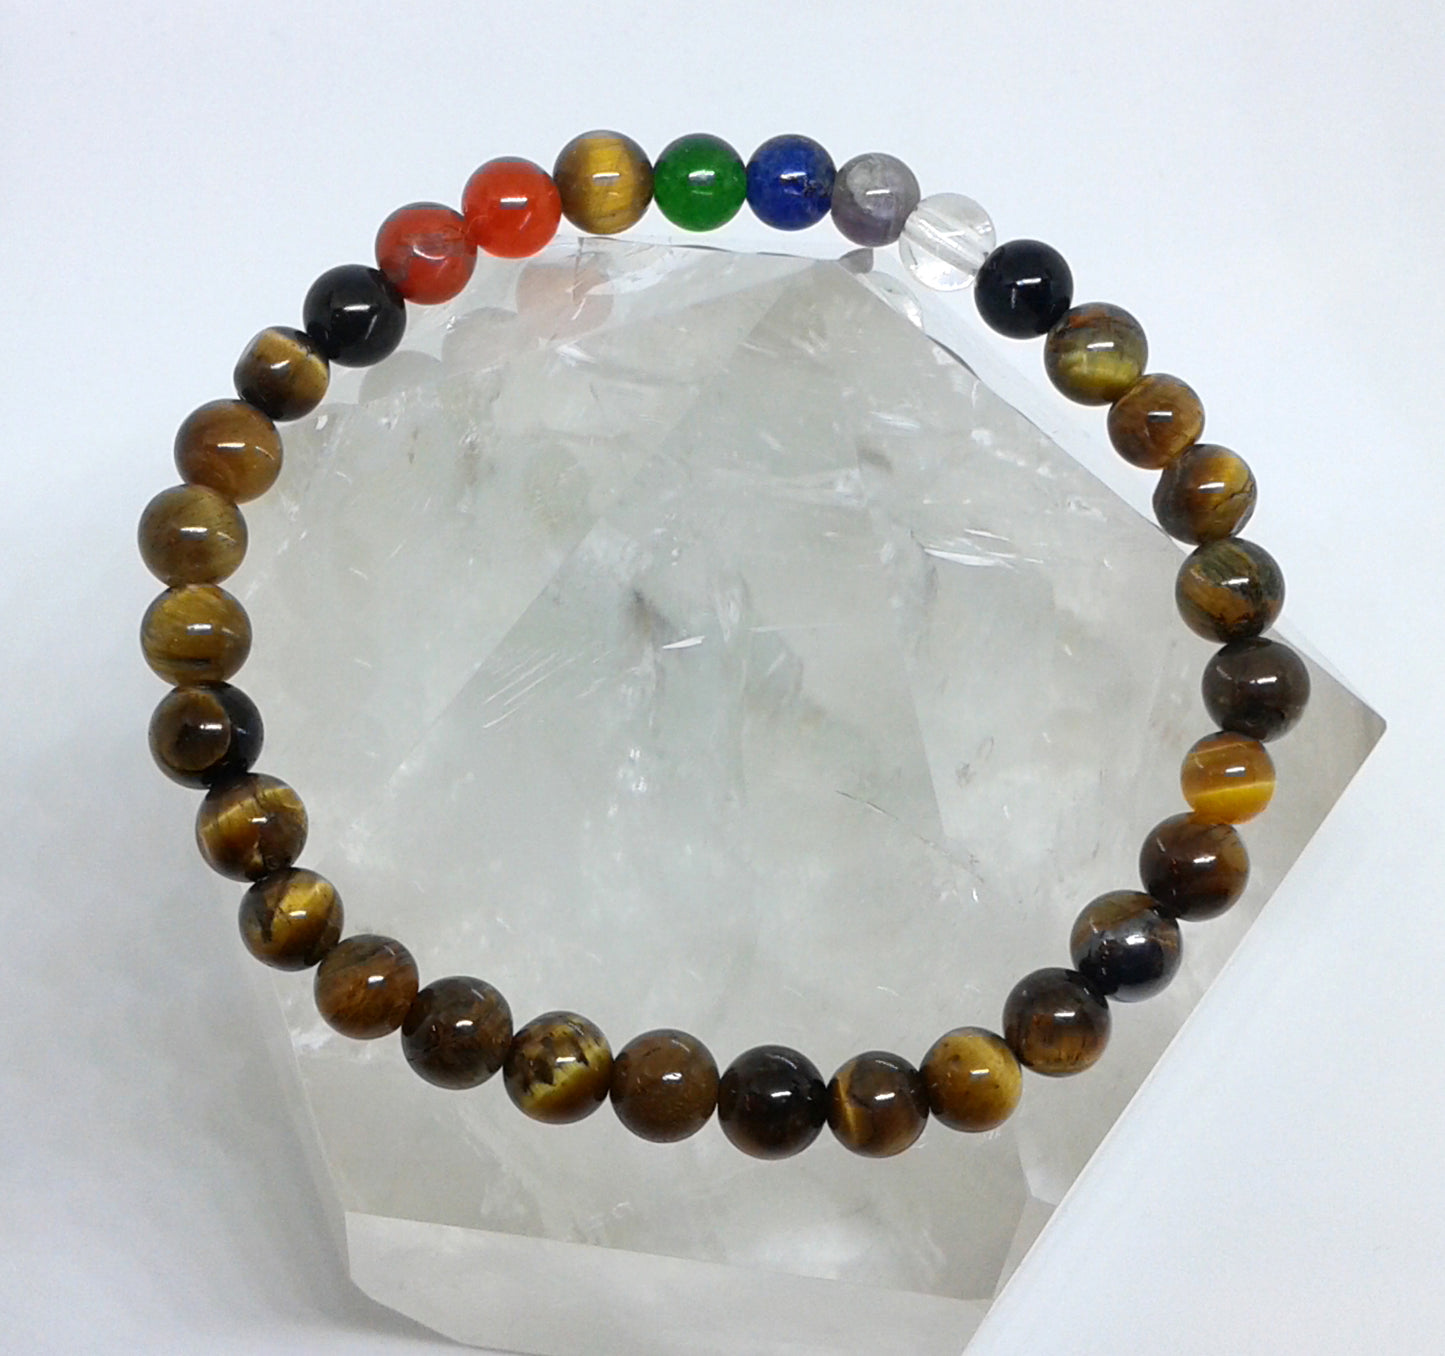 Chakra Bracelet - 1 sequence Surrounded by Golden Tiger Eye 6 mm beads